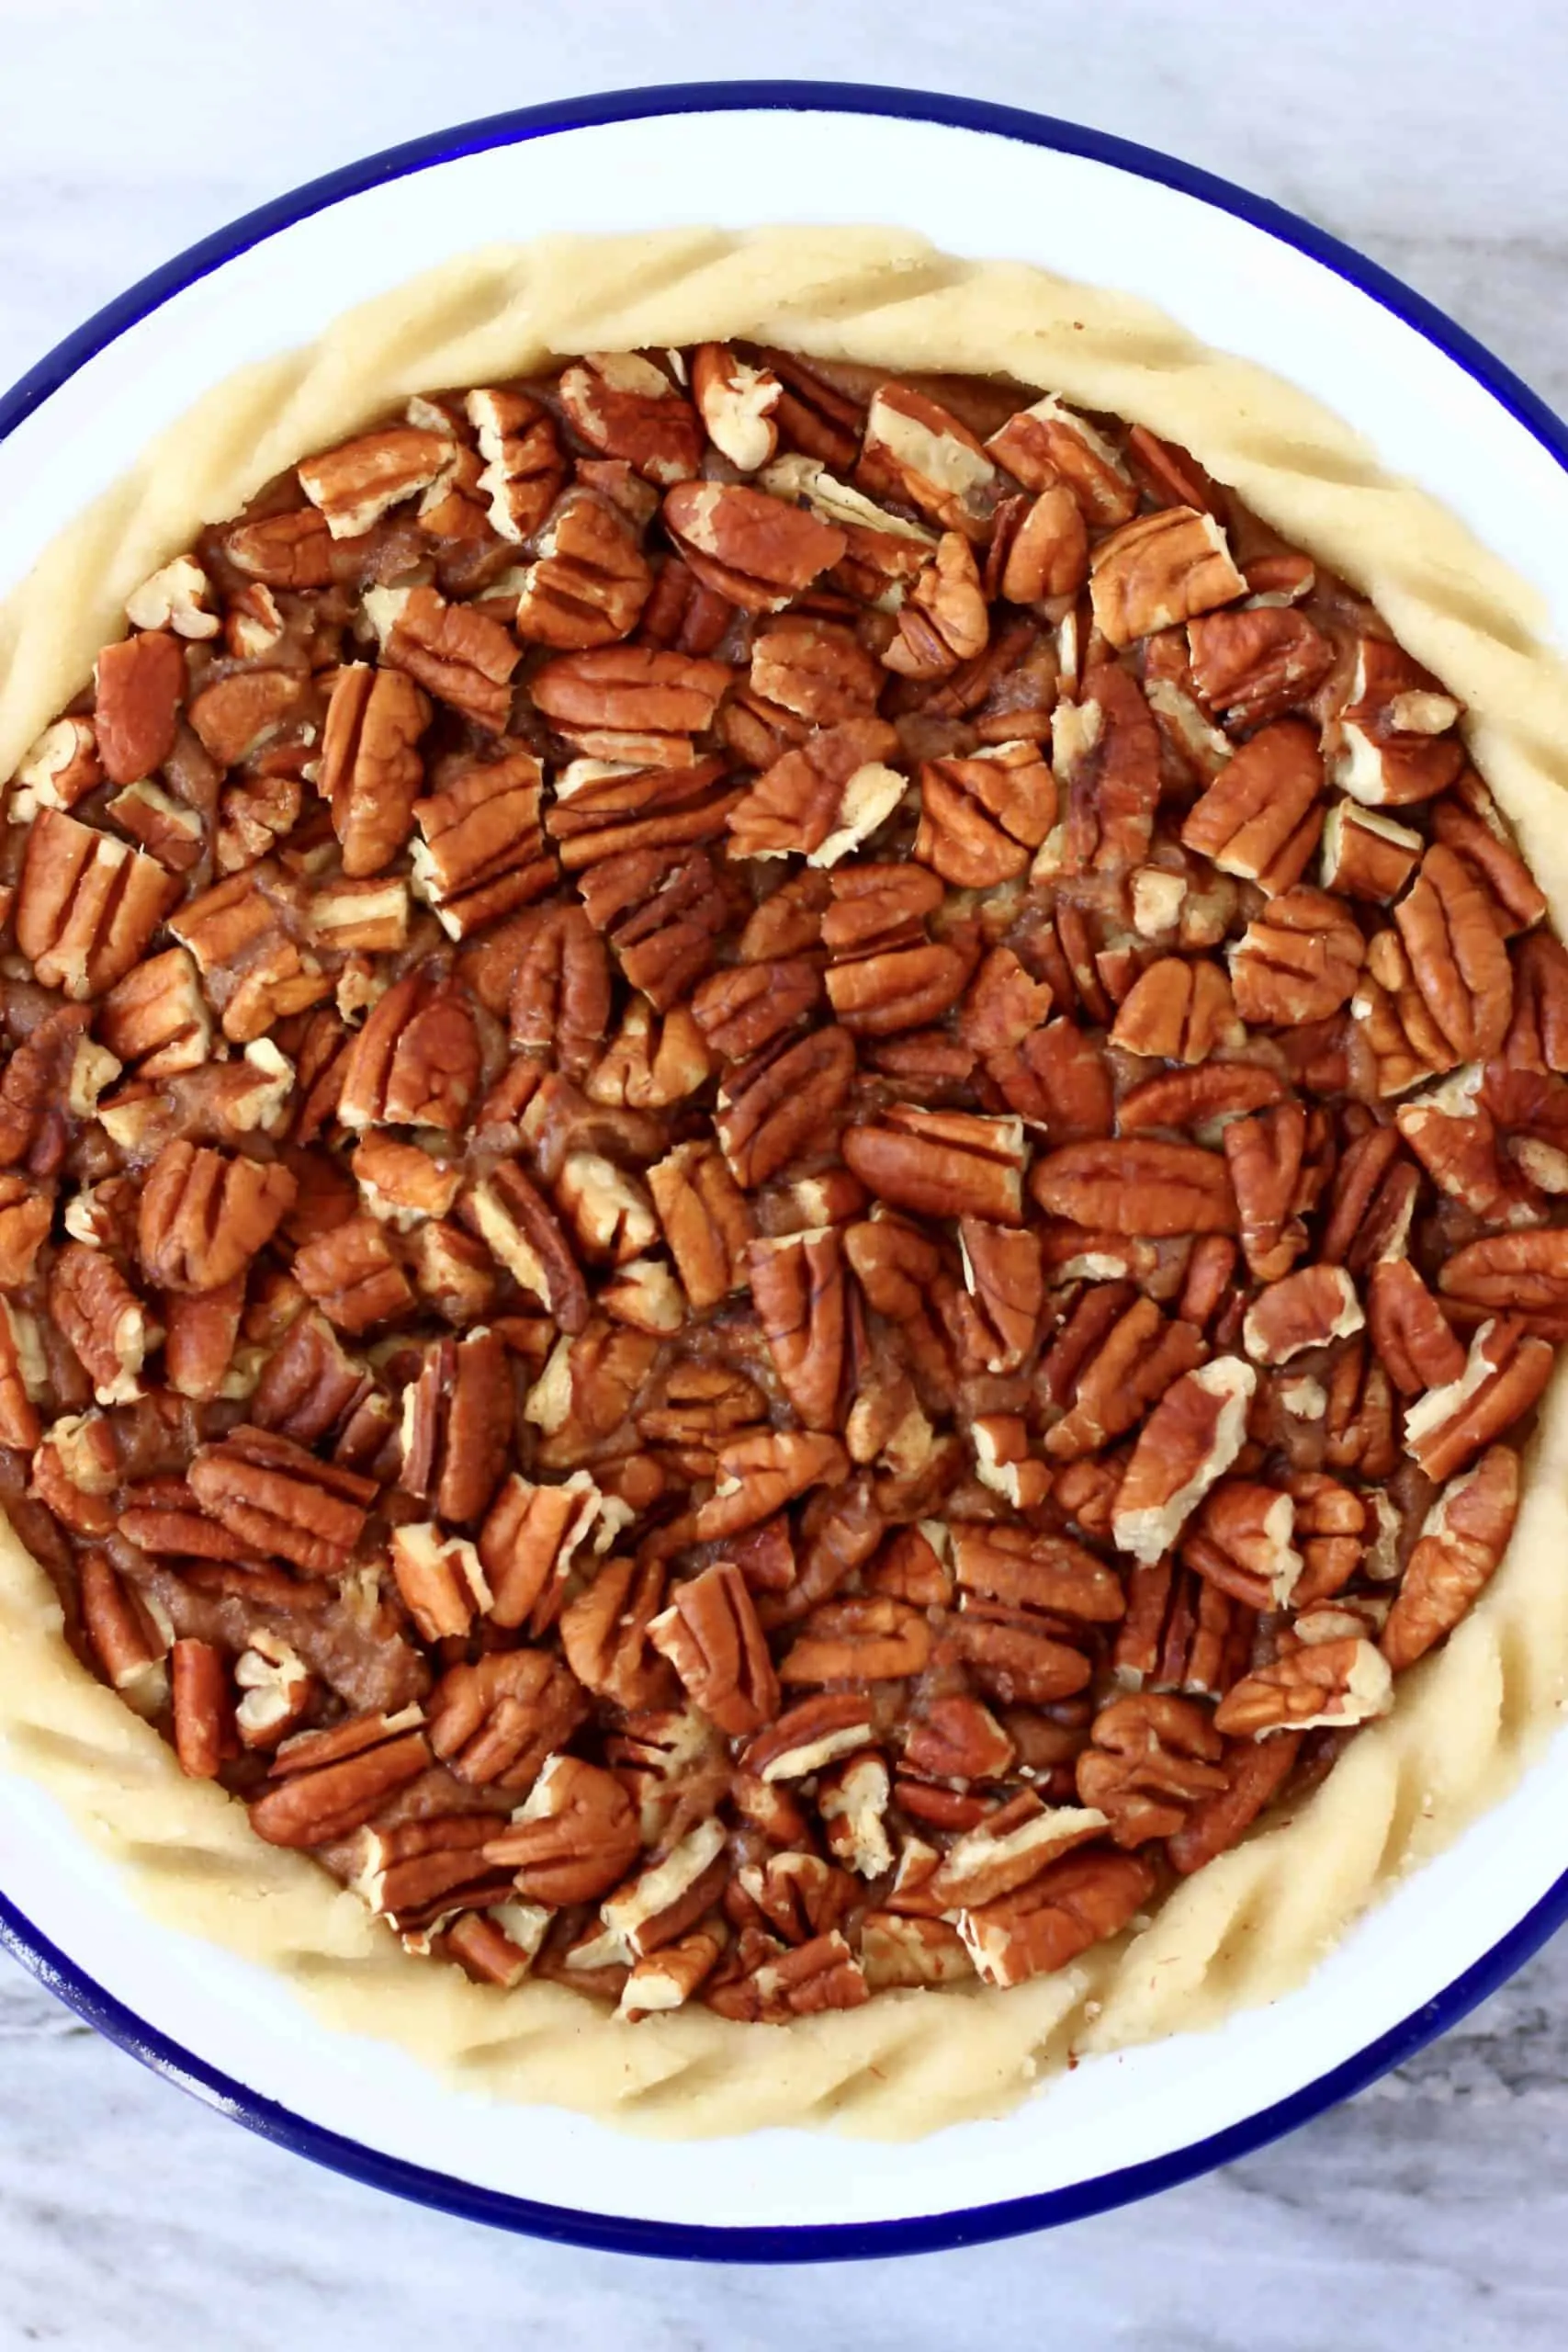 Raw gluten-free vegan pecan pie topped with chopped pecan nuts in a pie dish